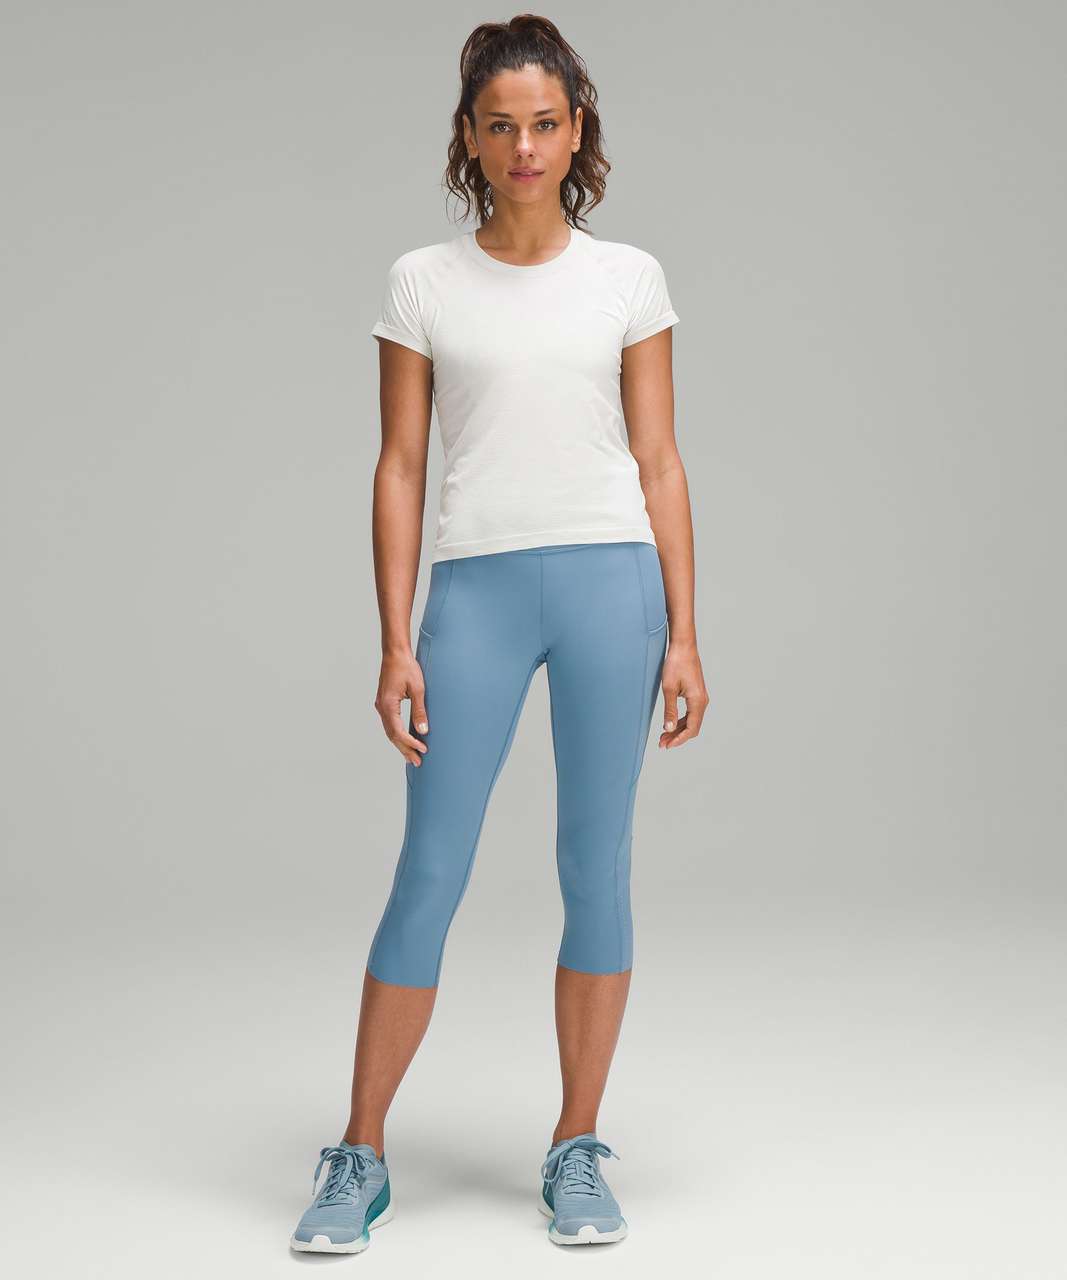 Lululemon athletica Fast and Free Reflective High-Rise Crop 23